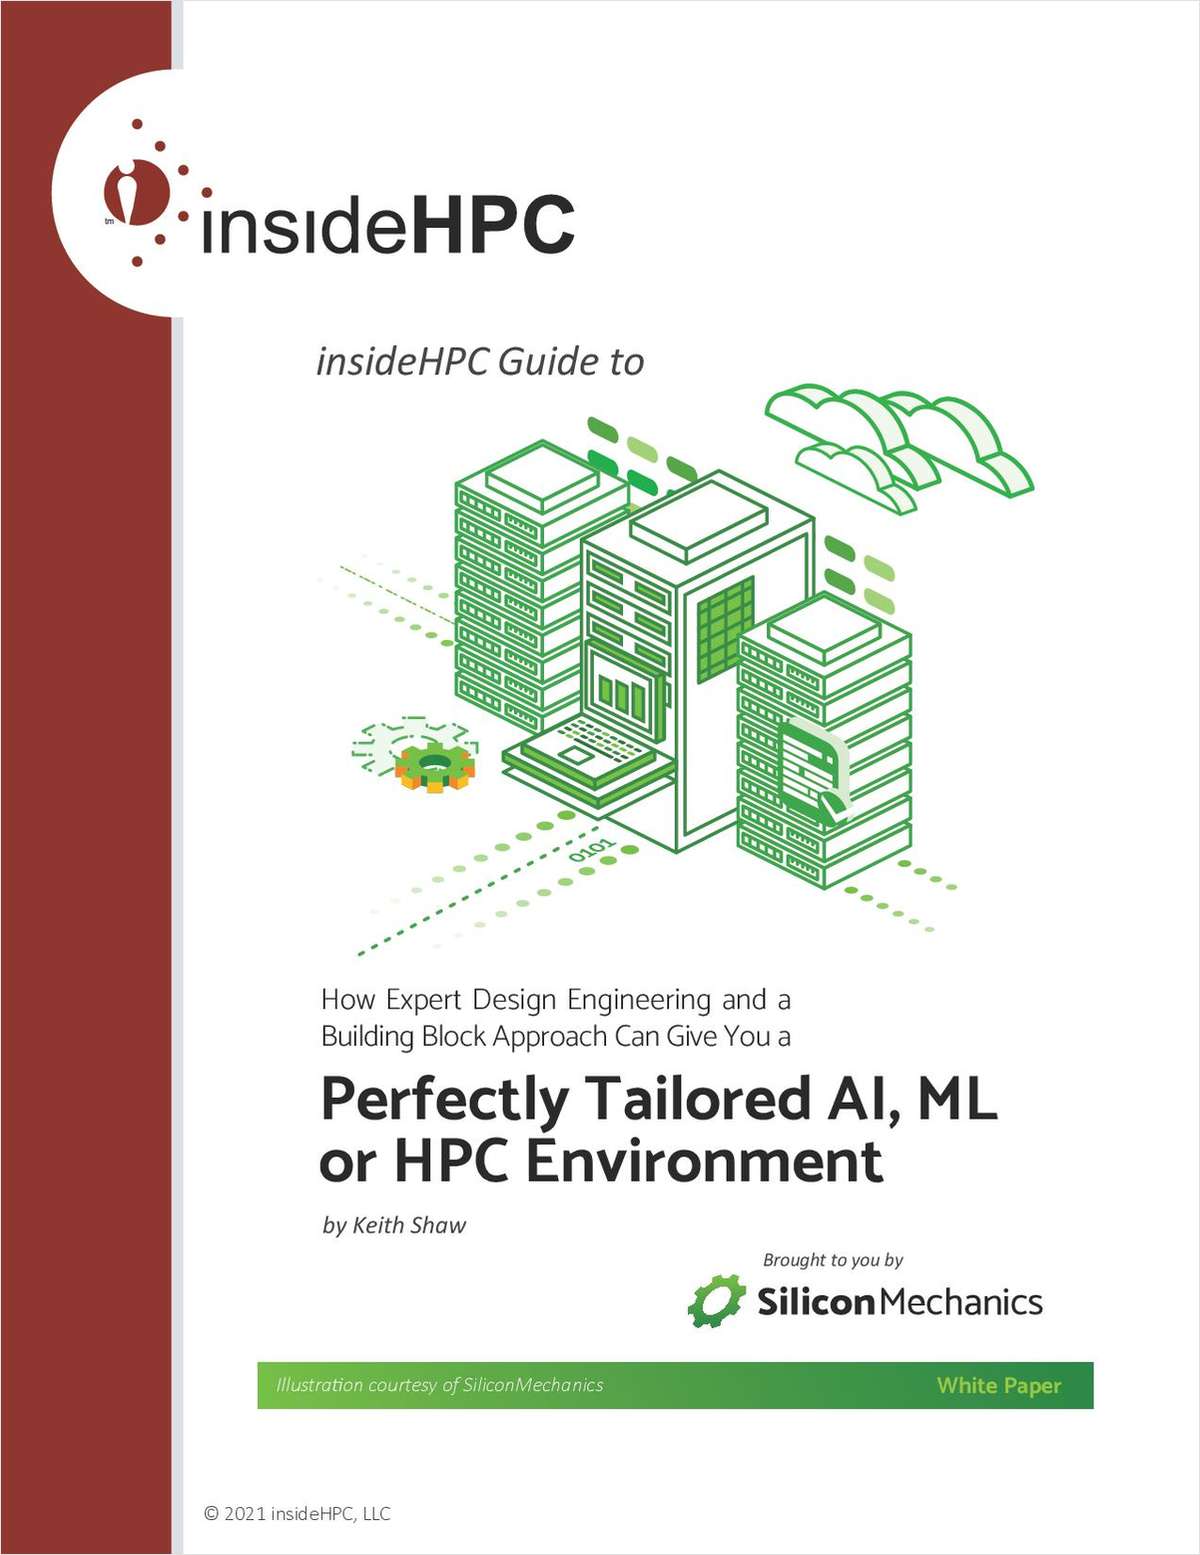 insideHPC Guide to Perfectly Tailored AI, ML or HPC Environment